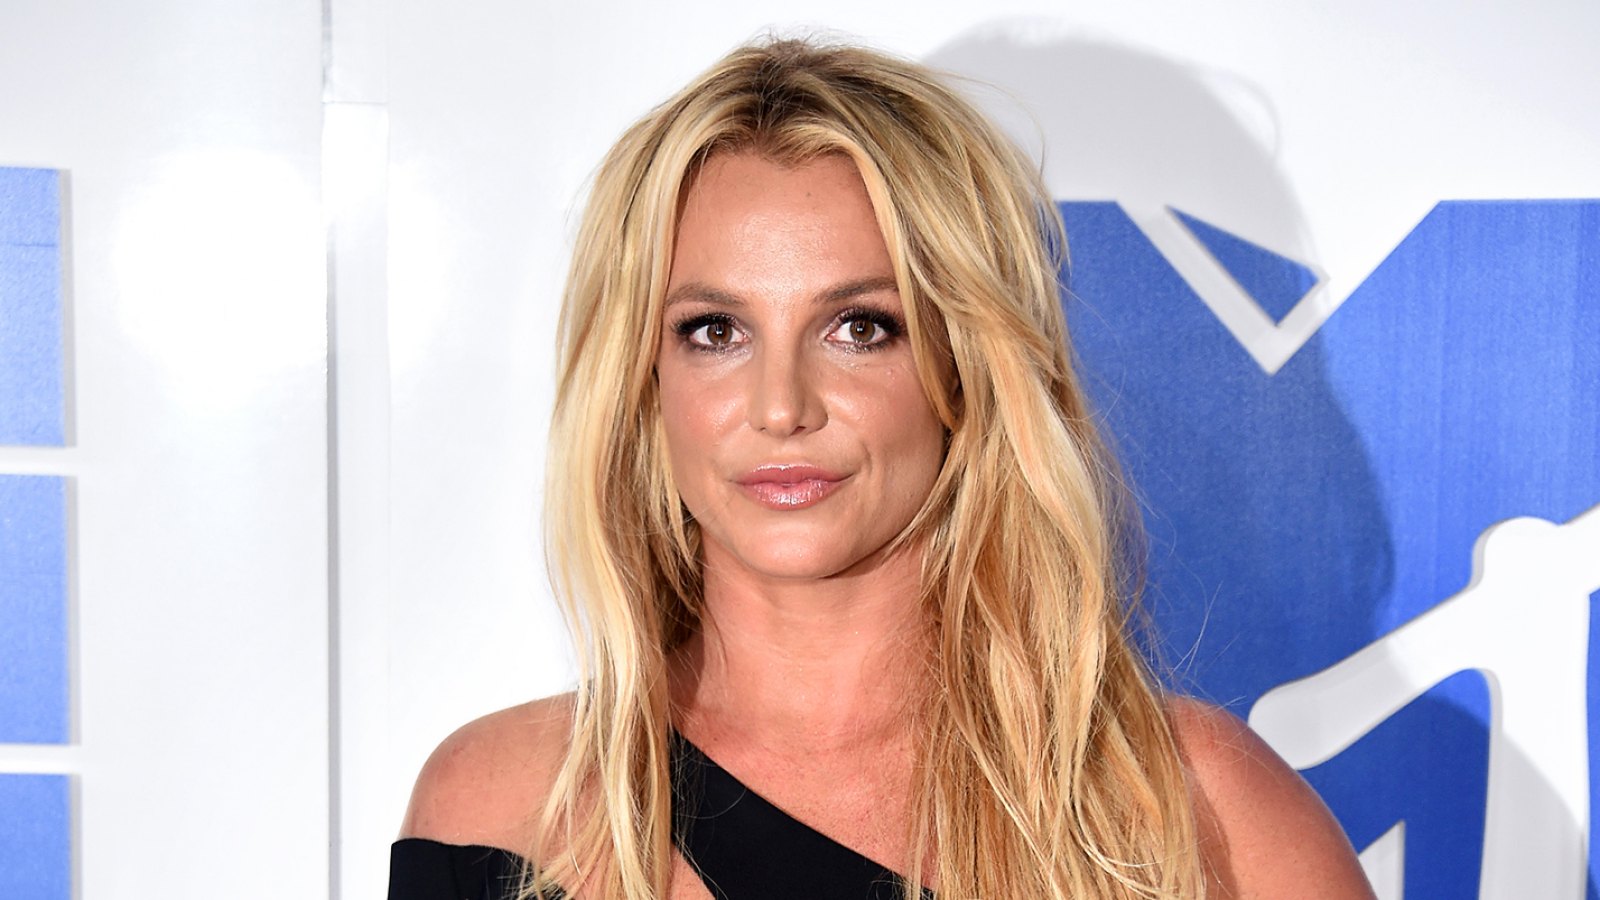 Britney Spears Fined for Driving Without Her License and Proof of Insurance